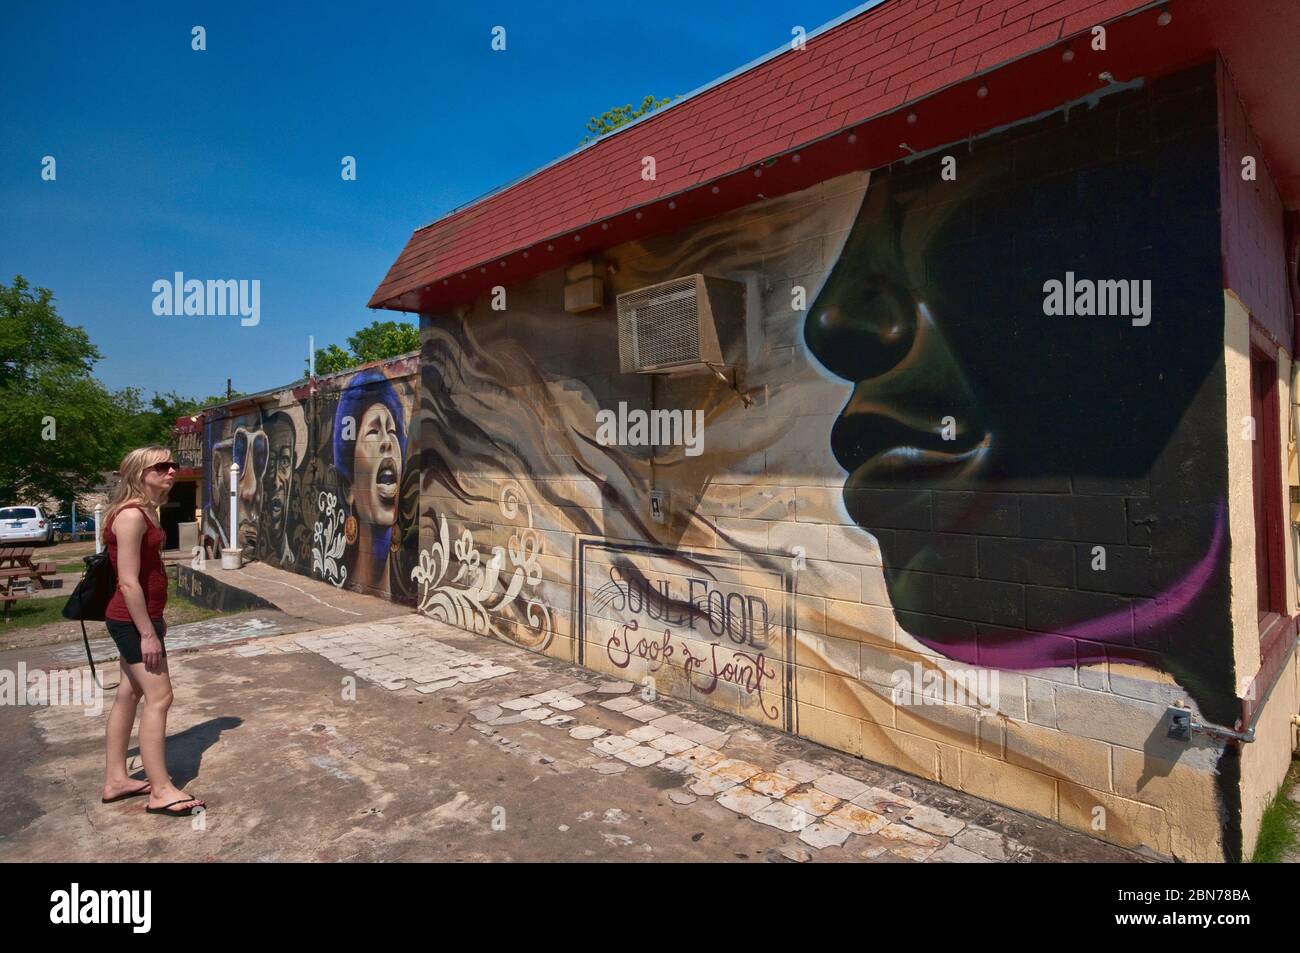 Mural at Soul Food restaurant at East 11th Street in Austin, Texas, USA Stock Photo